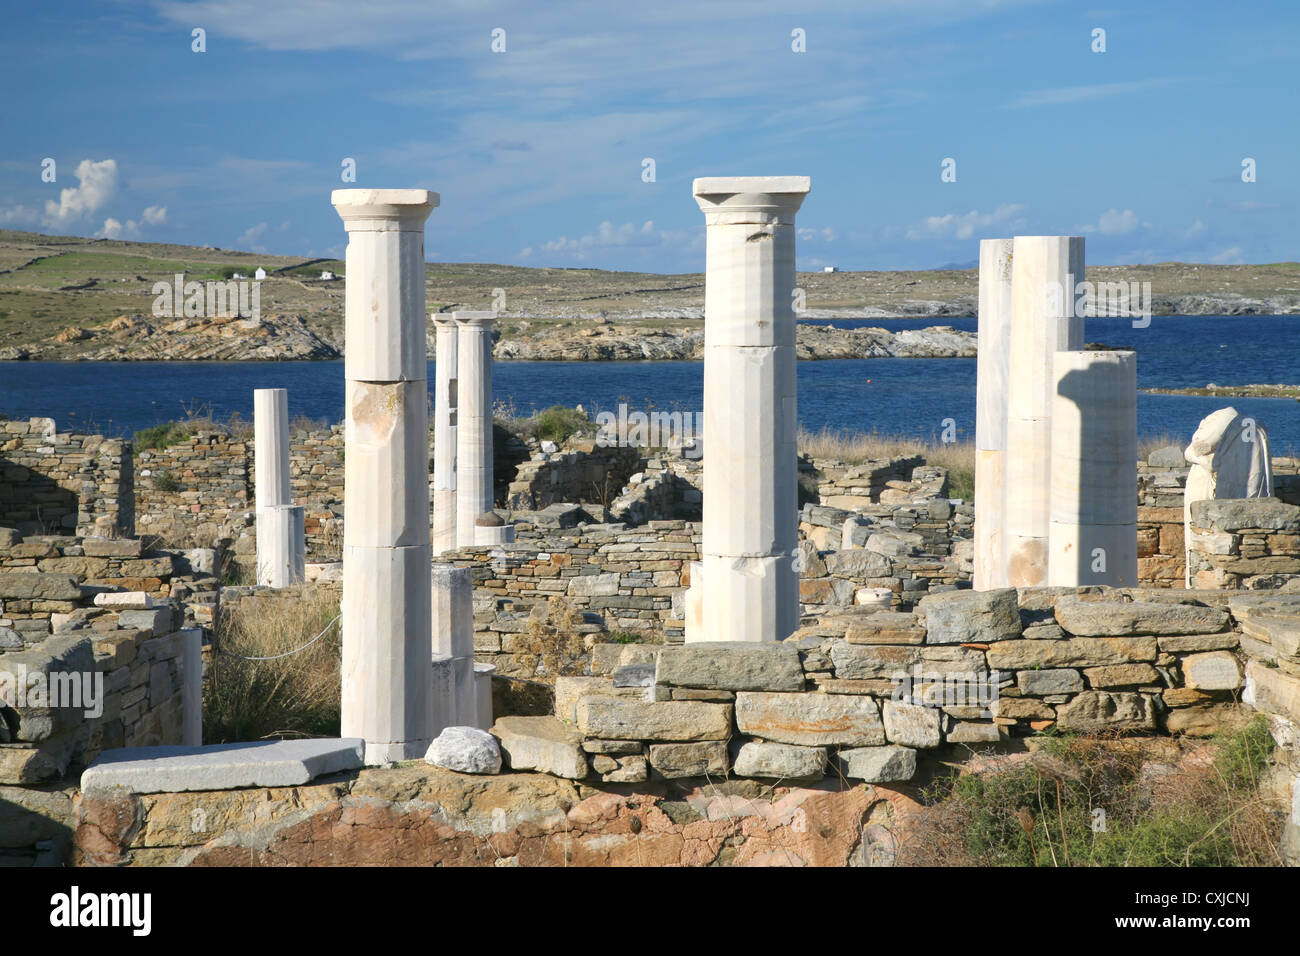 View overlooking 'Cleopatra's House' and the ruins of Delos towards the shore  the Greek island of Delos. Stock Photo